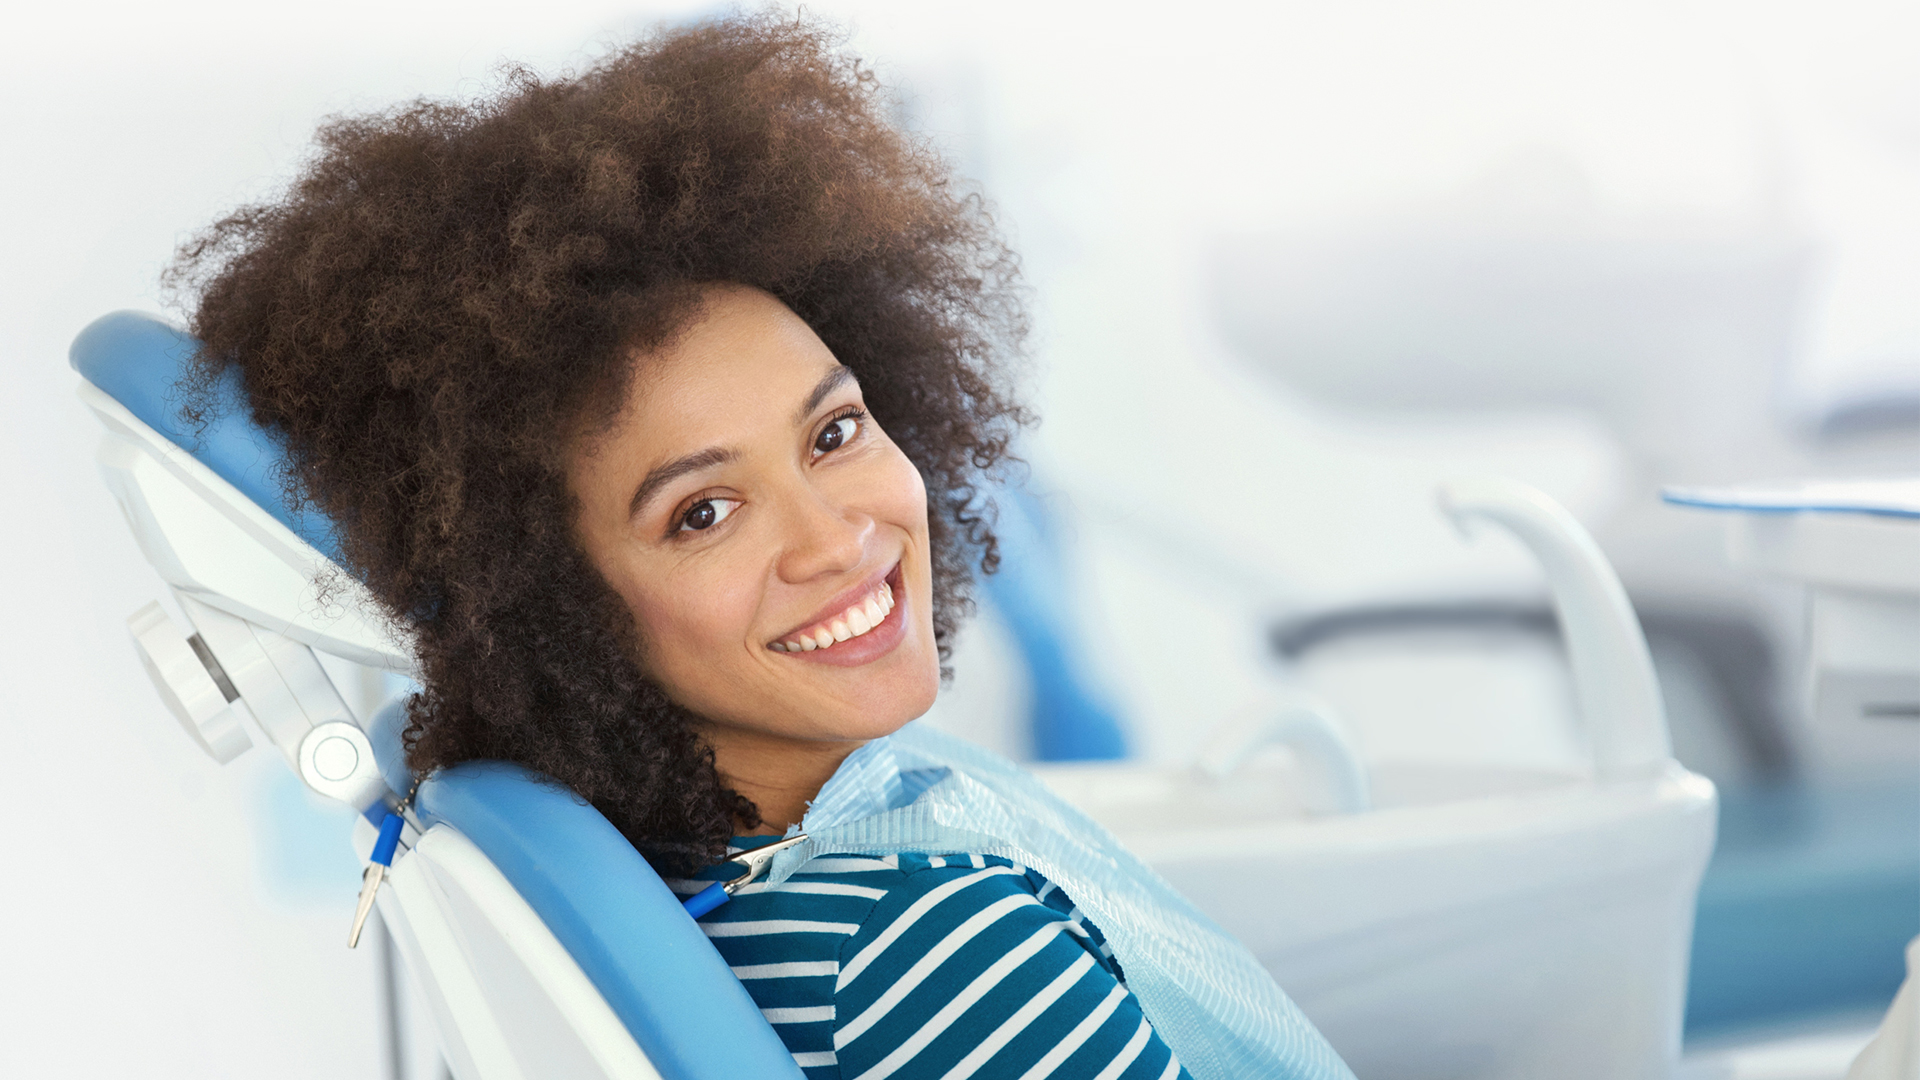 Dental patients are increasingly looking for convenience when opting for dental treatment.